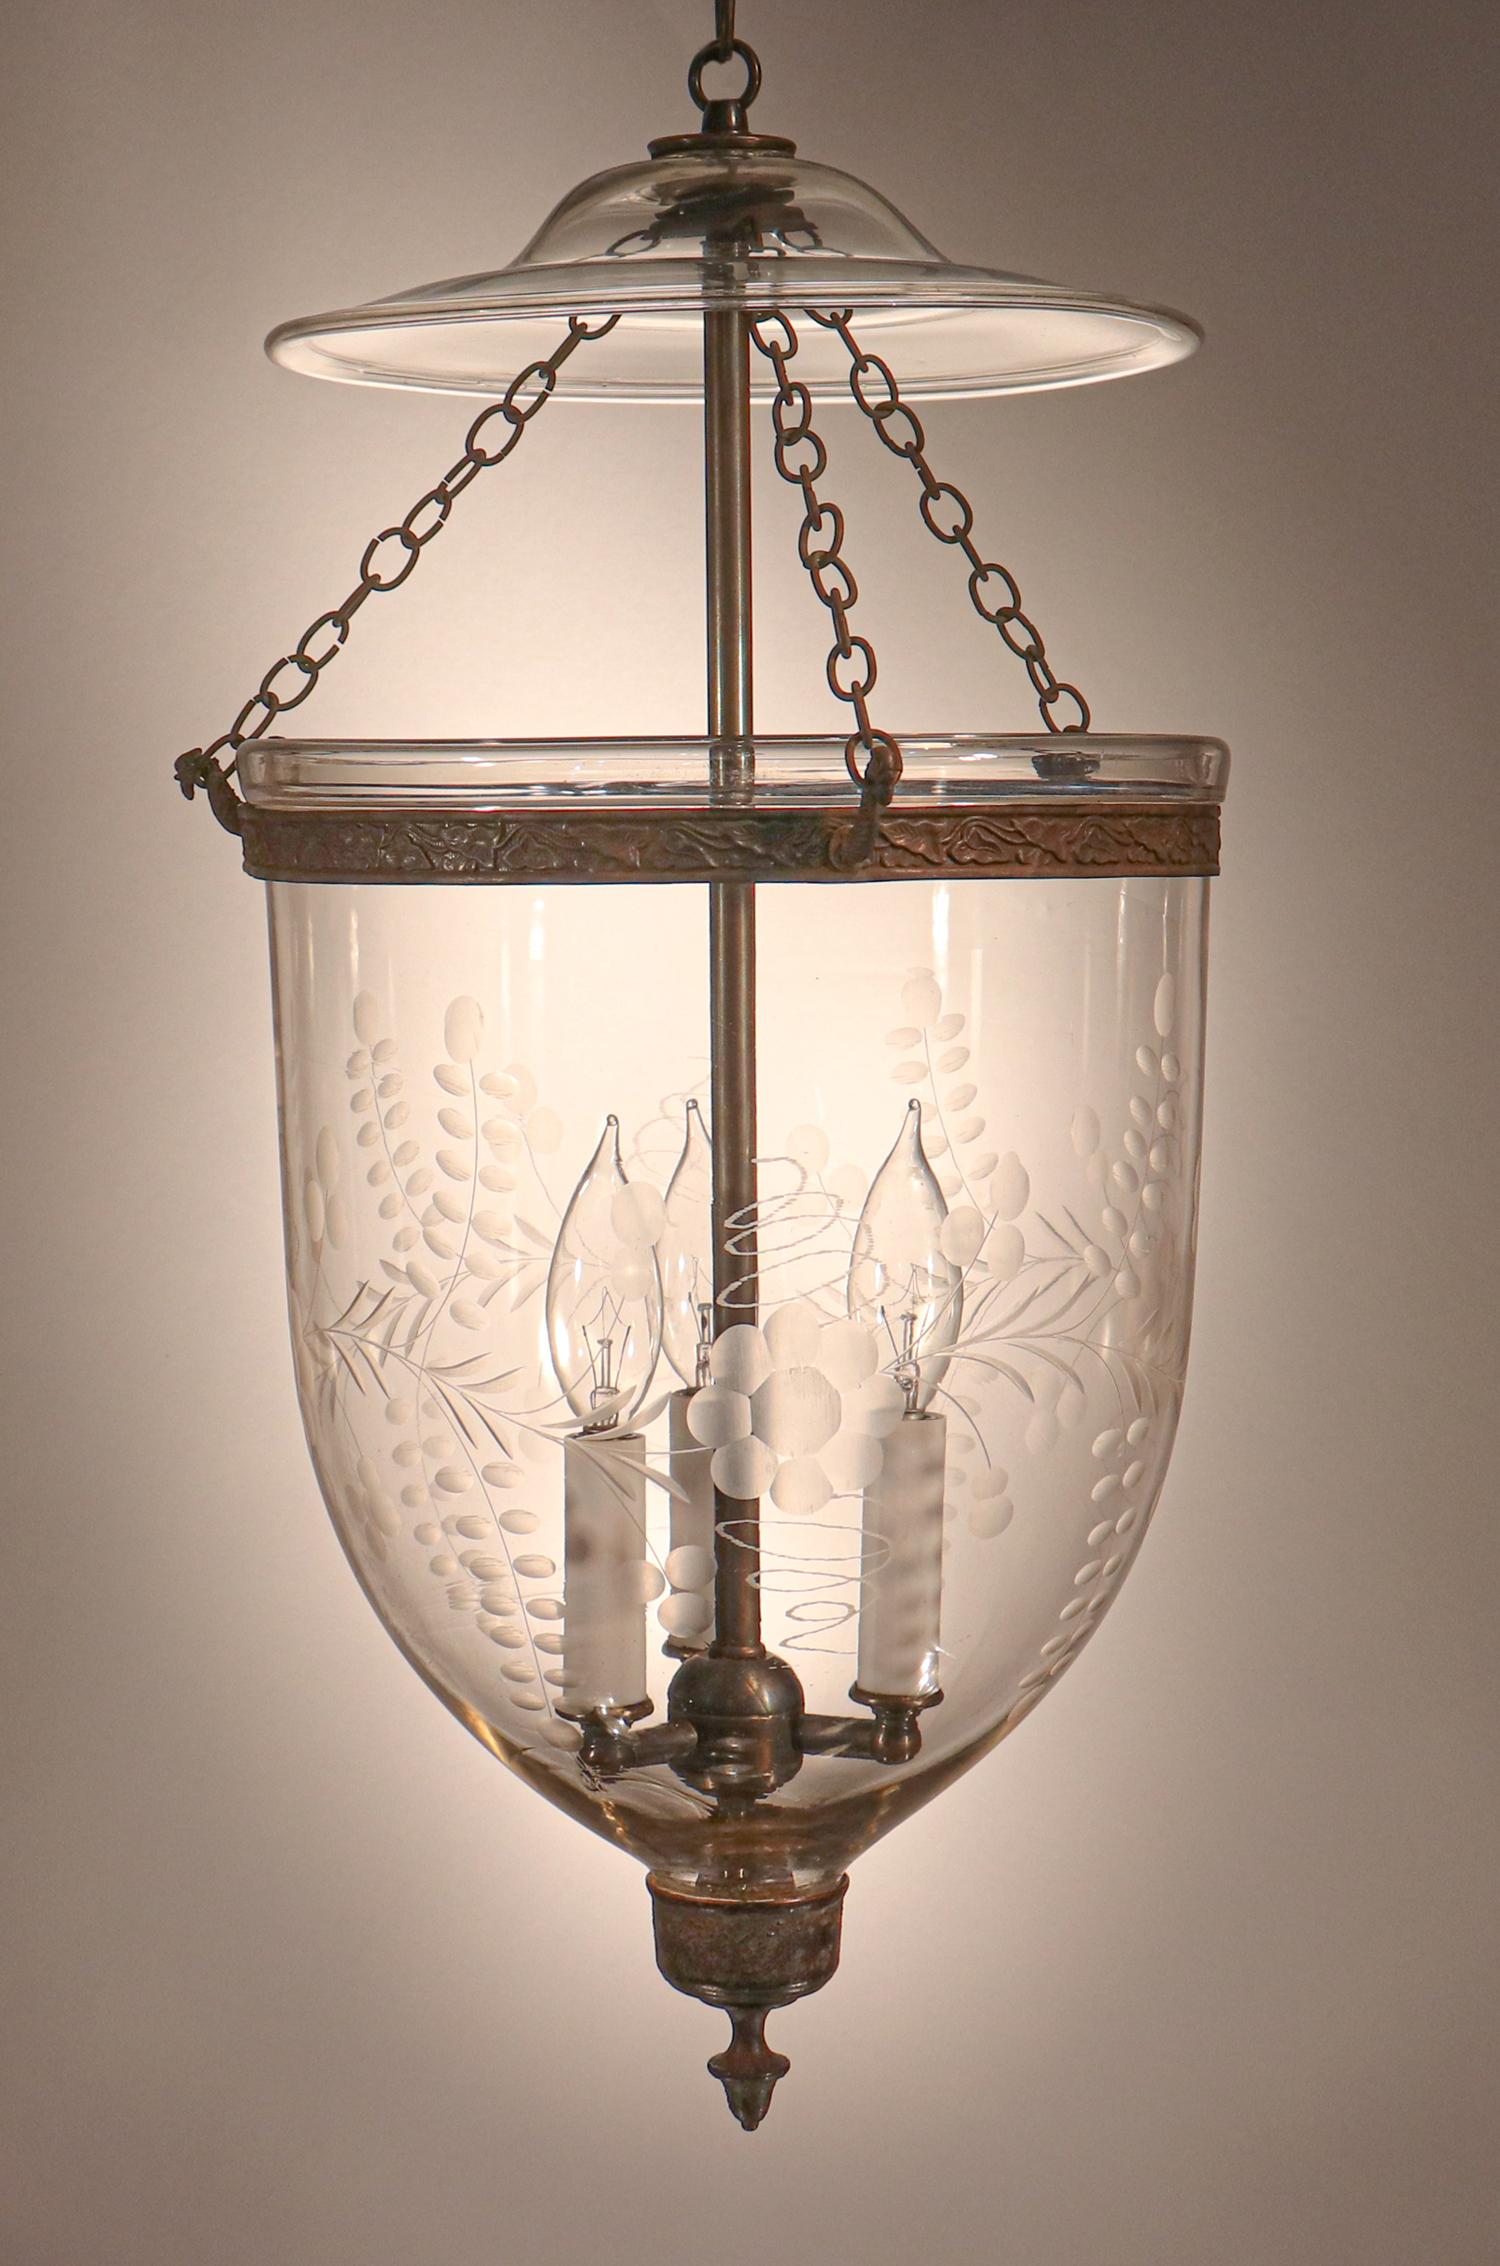 An outstanding antique English bell jar lantern with a finely etched floral motif. This circa 1850 lantern features very good quality hand blown glass replete with desirable swirling, as well as an original embossed brass band and chains. The